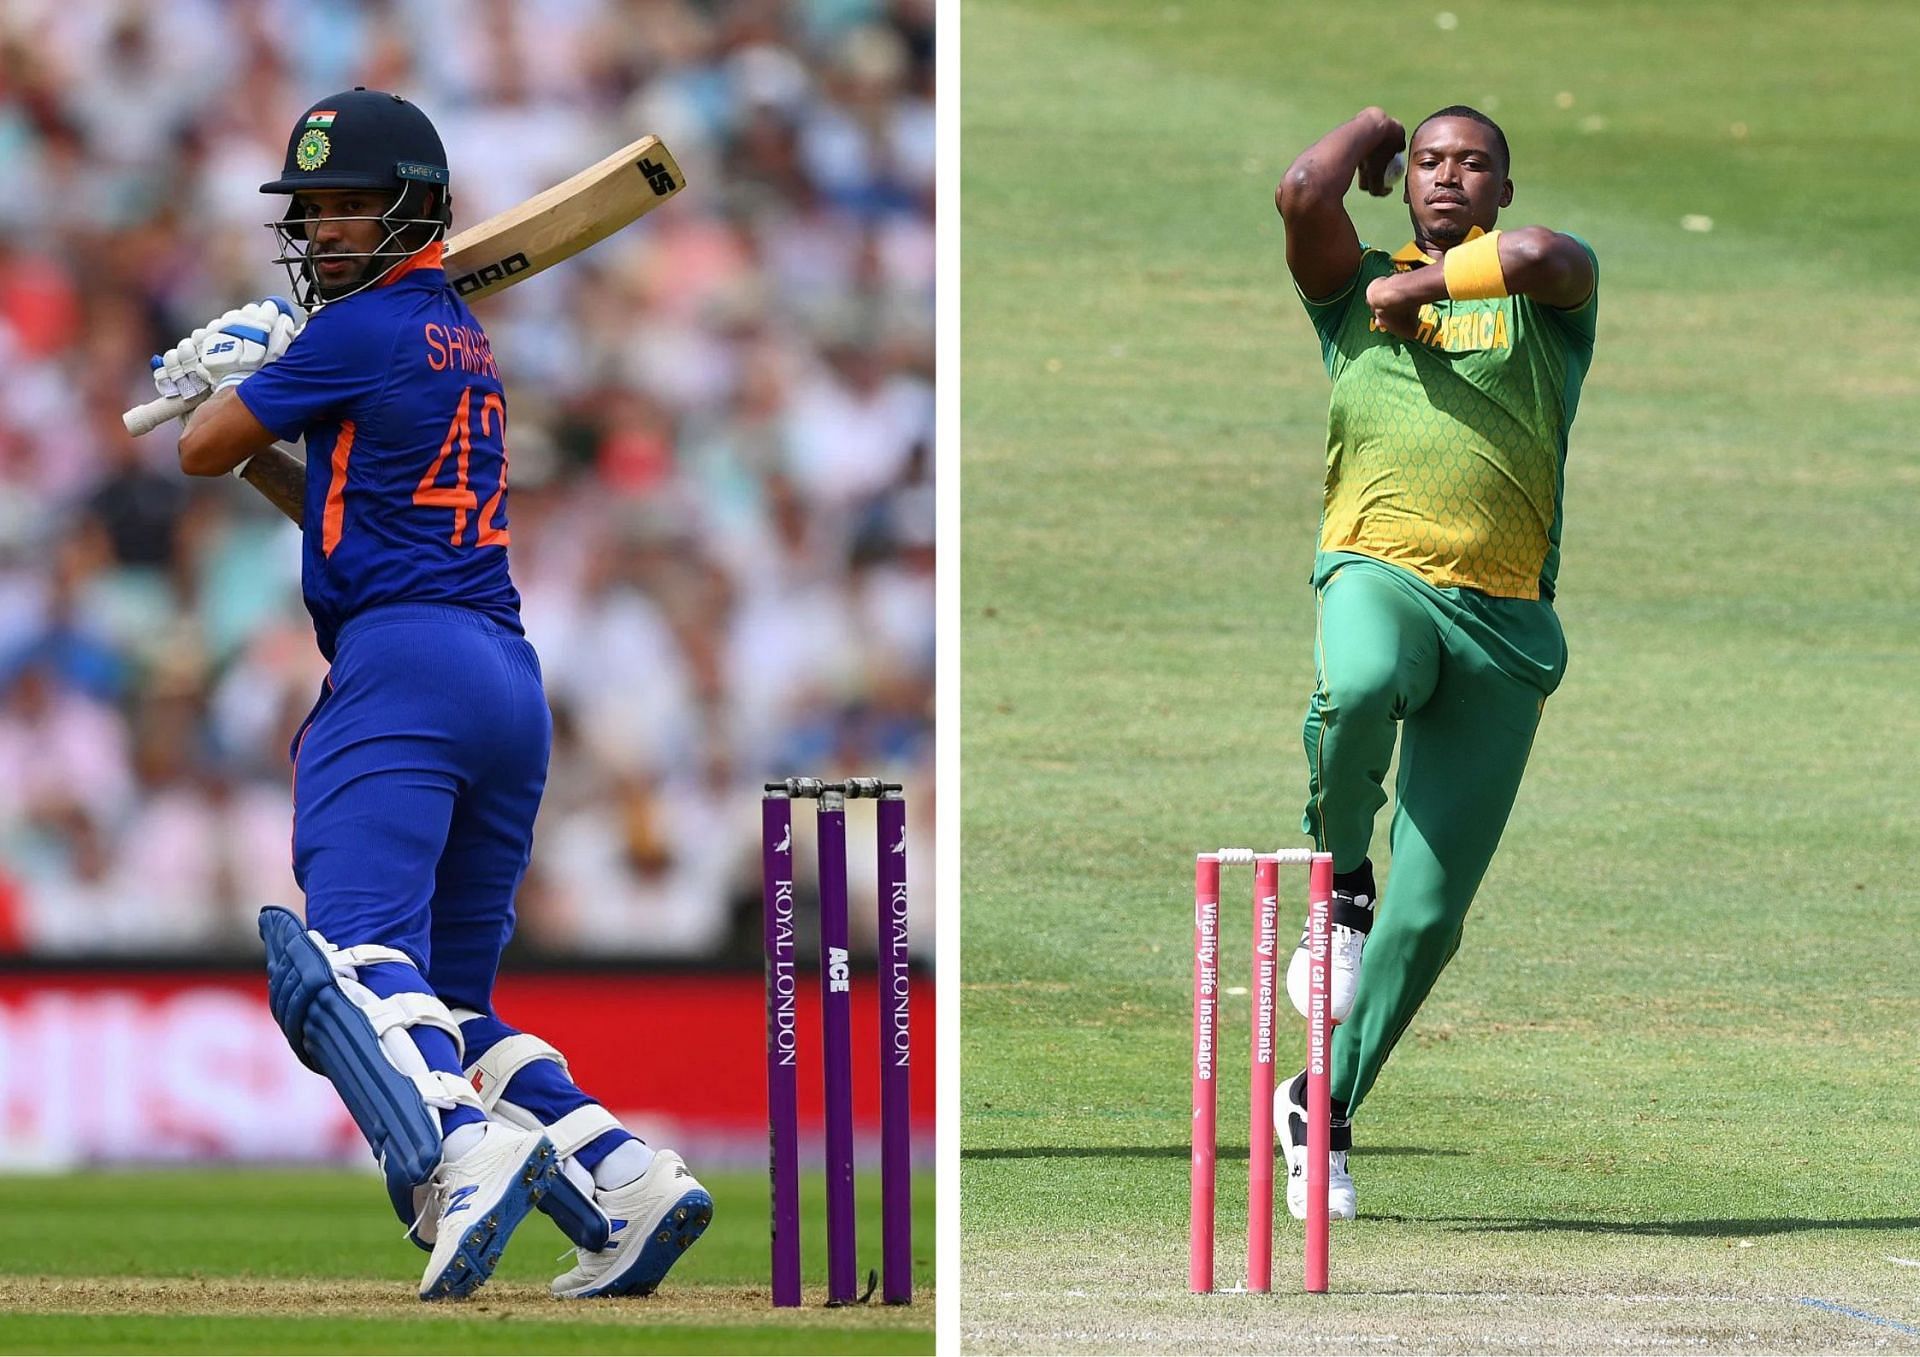 IND vs SA 2022: 3 player battles to watch out for in the 1st ODI